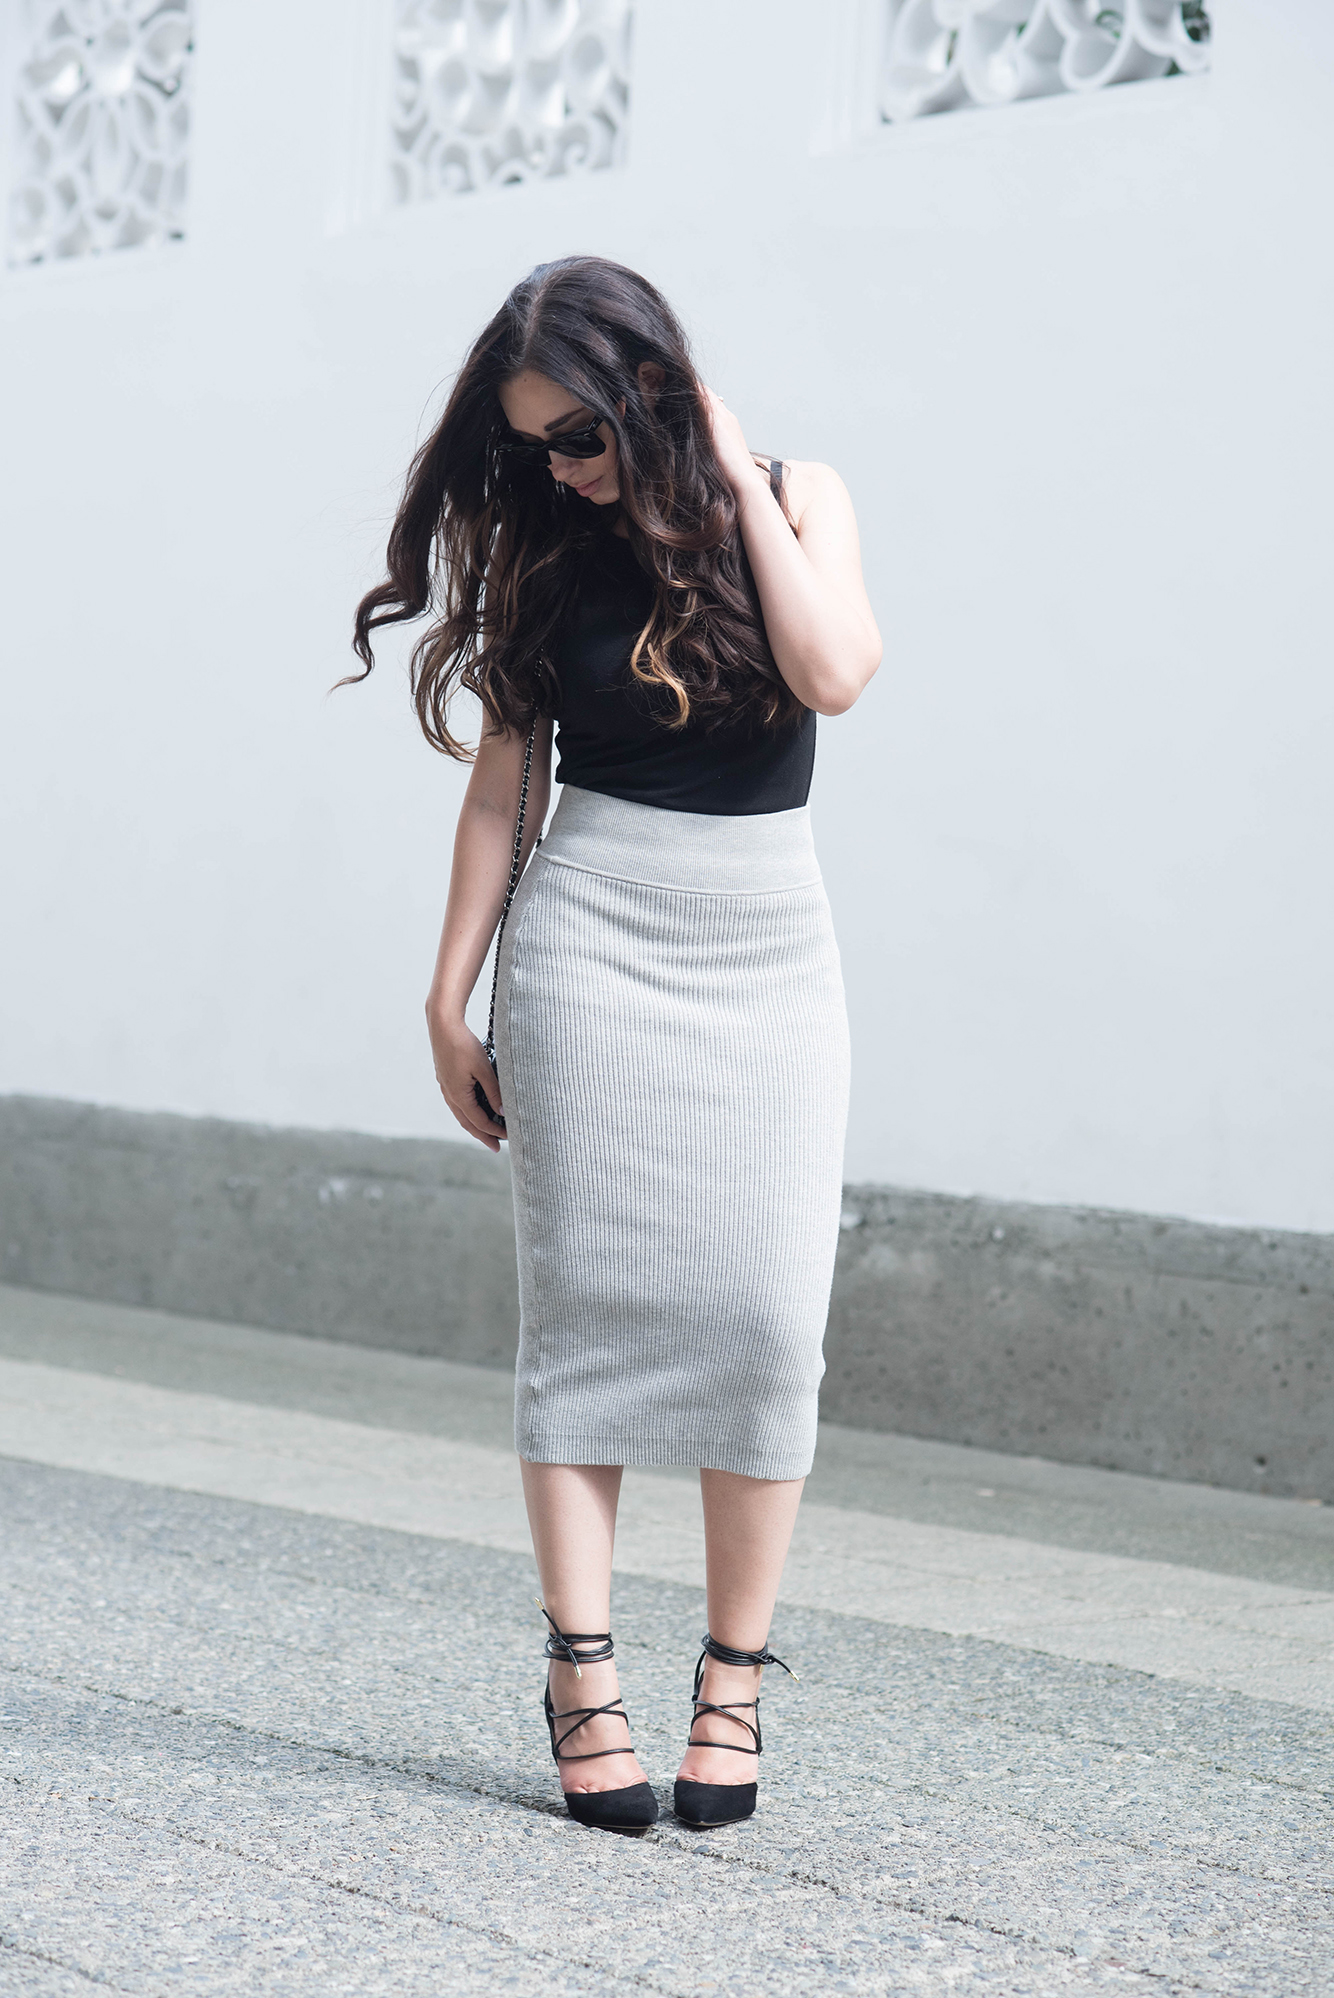 coco-and-vera-best-vancouver-style-blog-best-canadian-style-blog-top-blogger-street-style-forever-21-top-aritzia-skirt-sam-edelman-heels-rayban-sunglasses-chanel-handbag